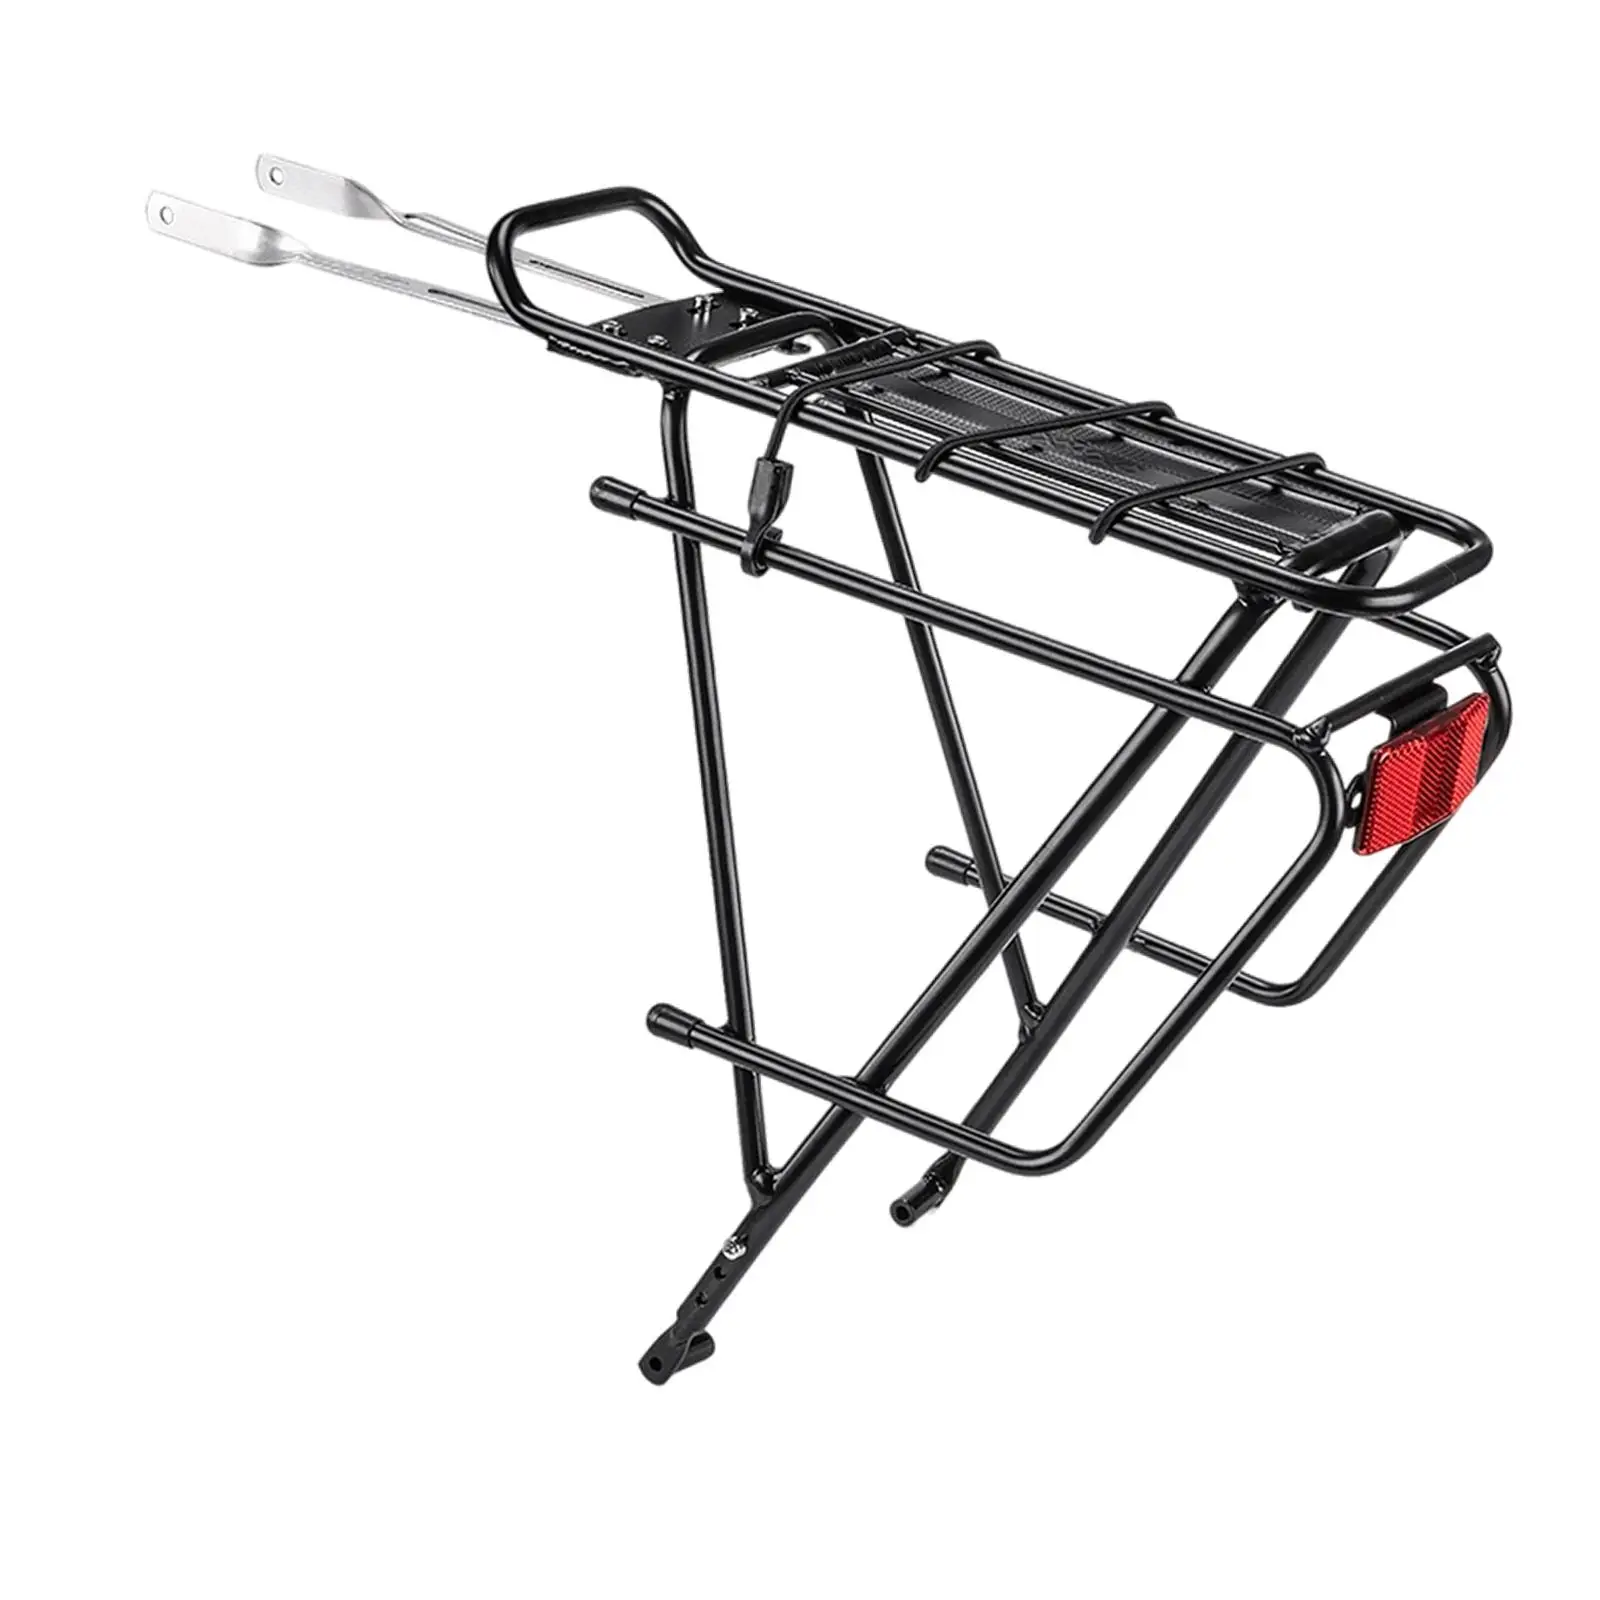 Bike Cargo Rack with Rope Bicycle Pannier Rack Durable Bicycle Touring Carrier for Mountain Bike Black Luggage Carrier Rack